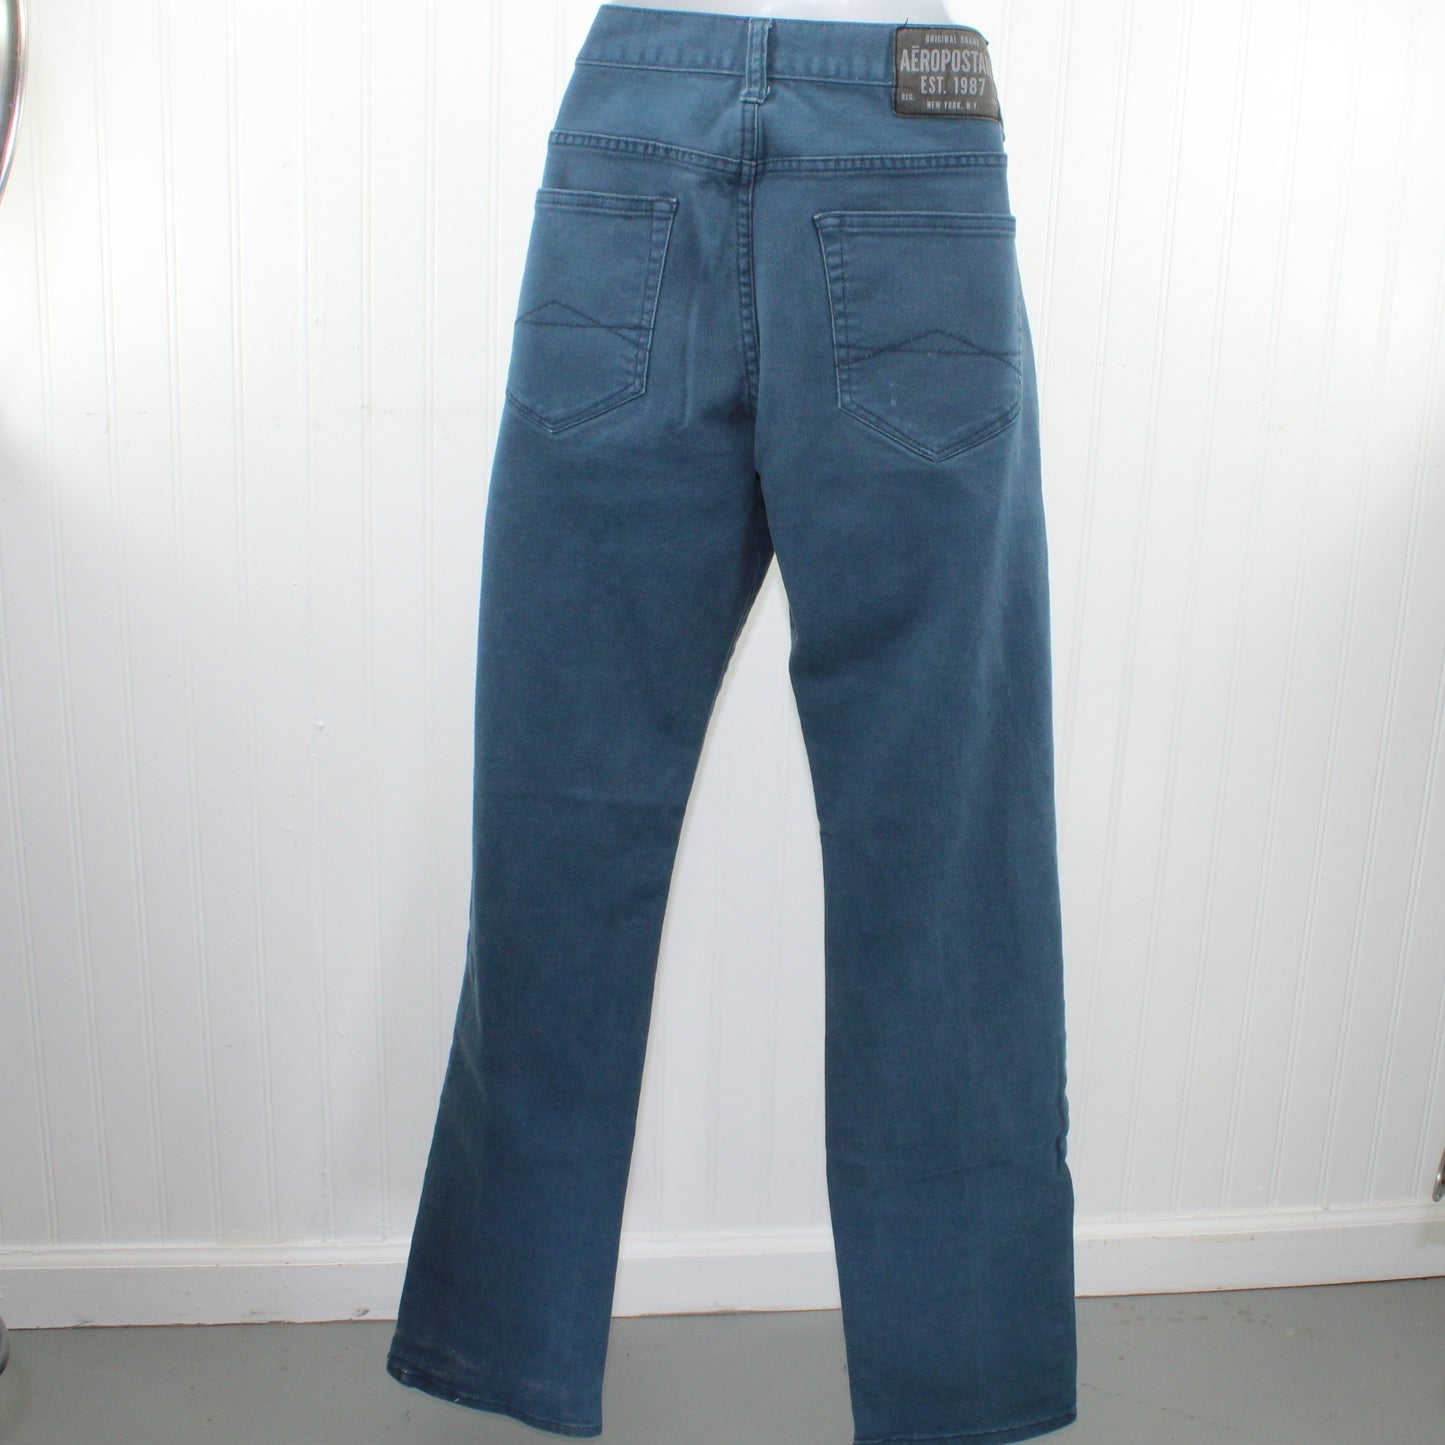 Aeropostale Bowery Vintage Slim Straight Jeans Blue Cotton 98% Spandex 2% Size 32/34 great pre owned condition